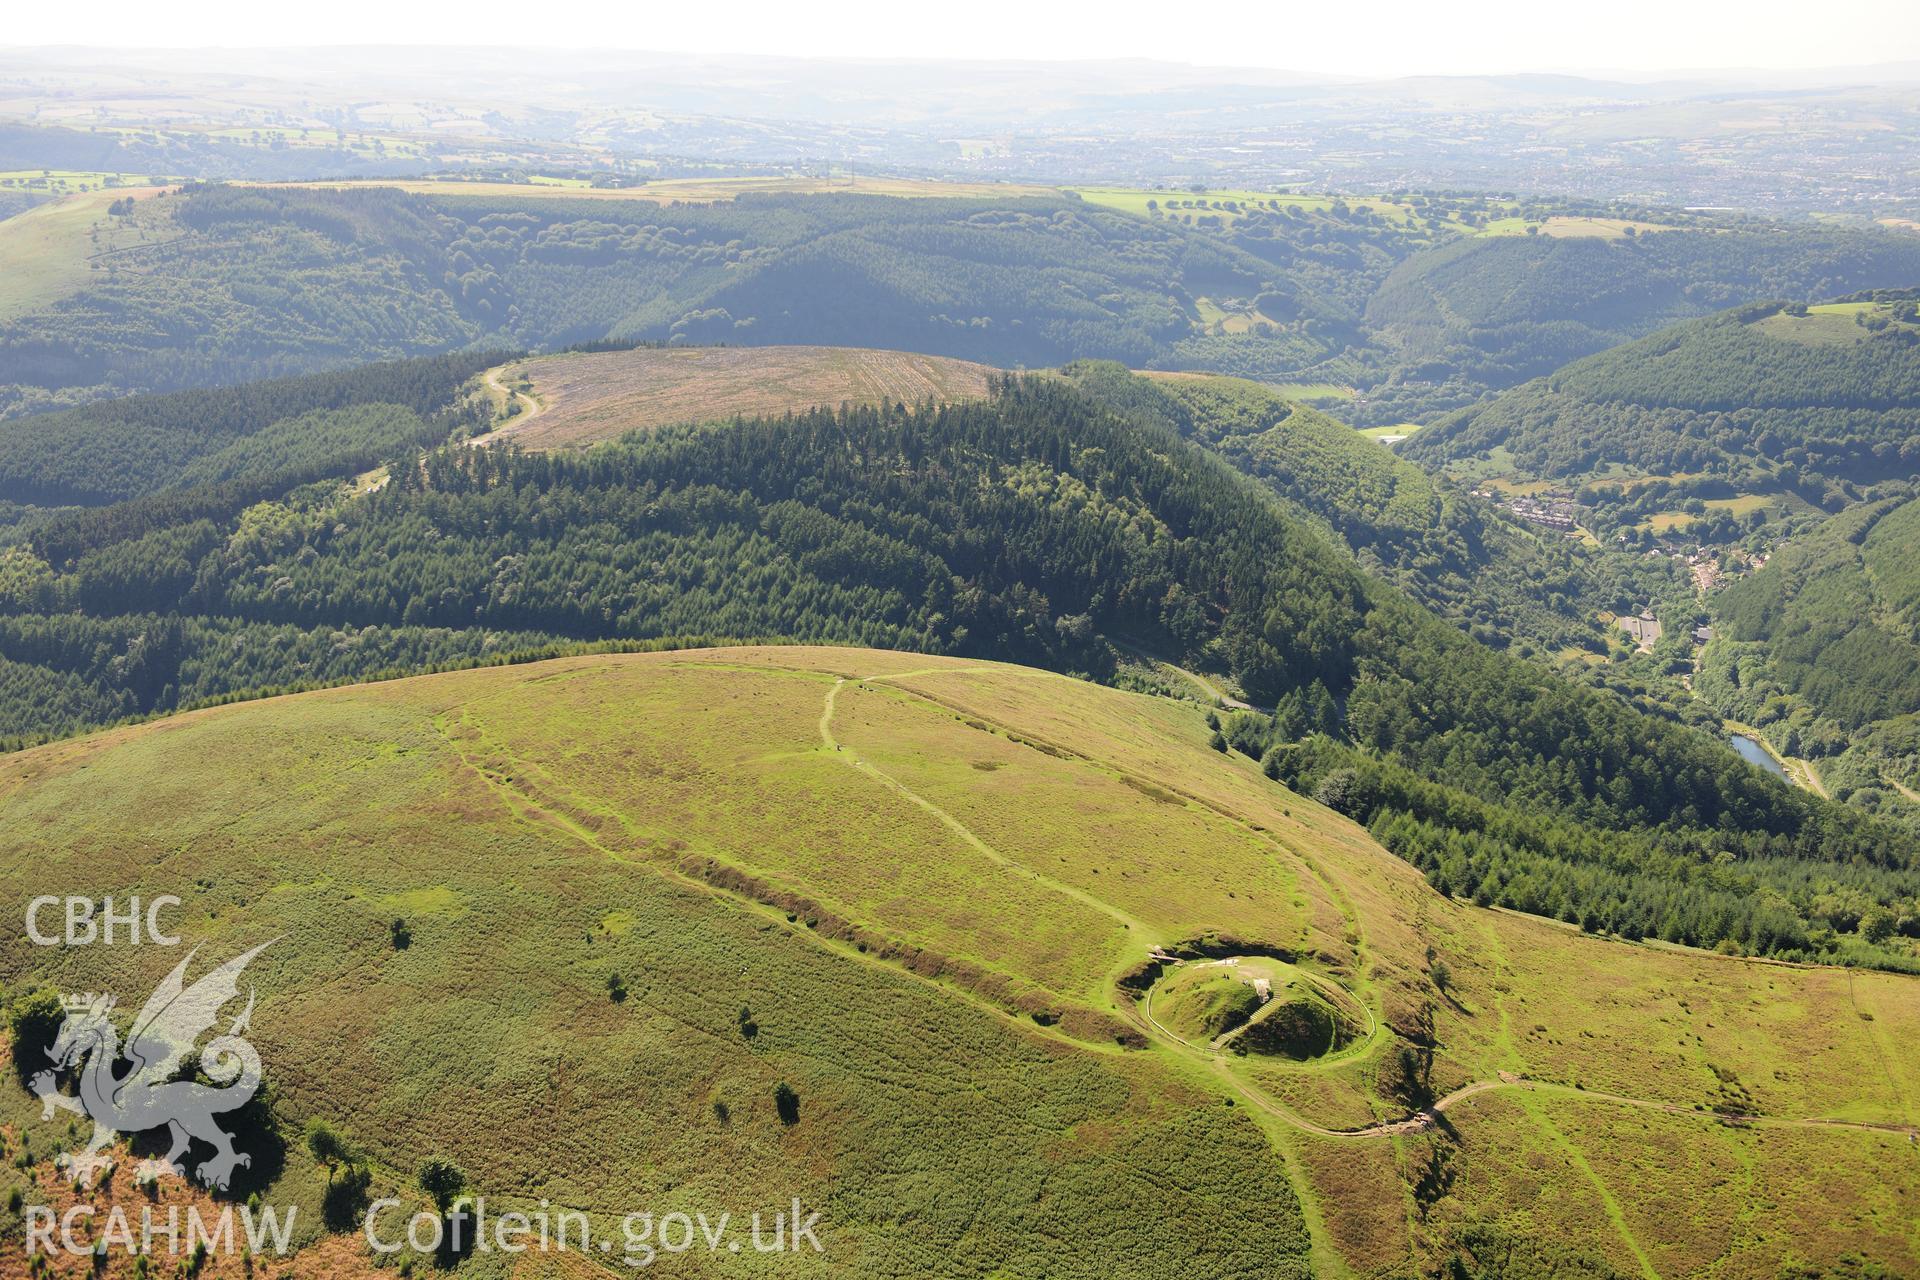 RCAHMW colour oblique photograph of Twmbarlwm, Castle and hillfort. Taken by Toby Driver on 24/07/2012.